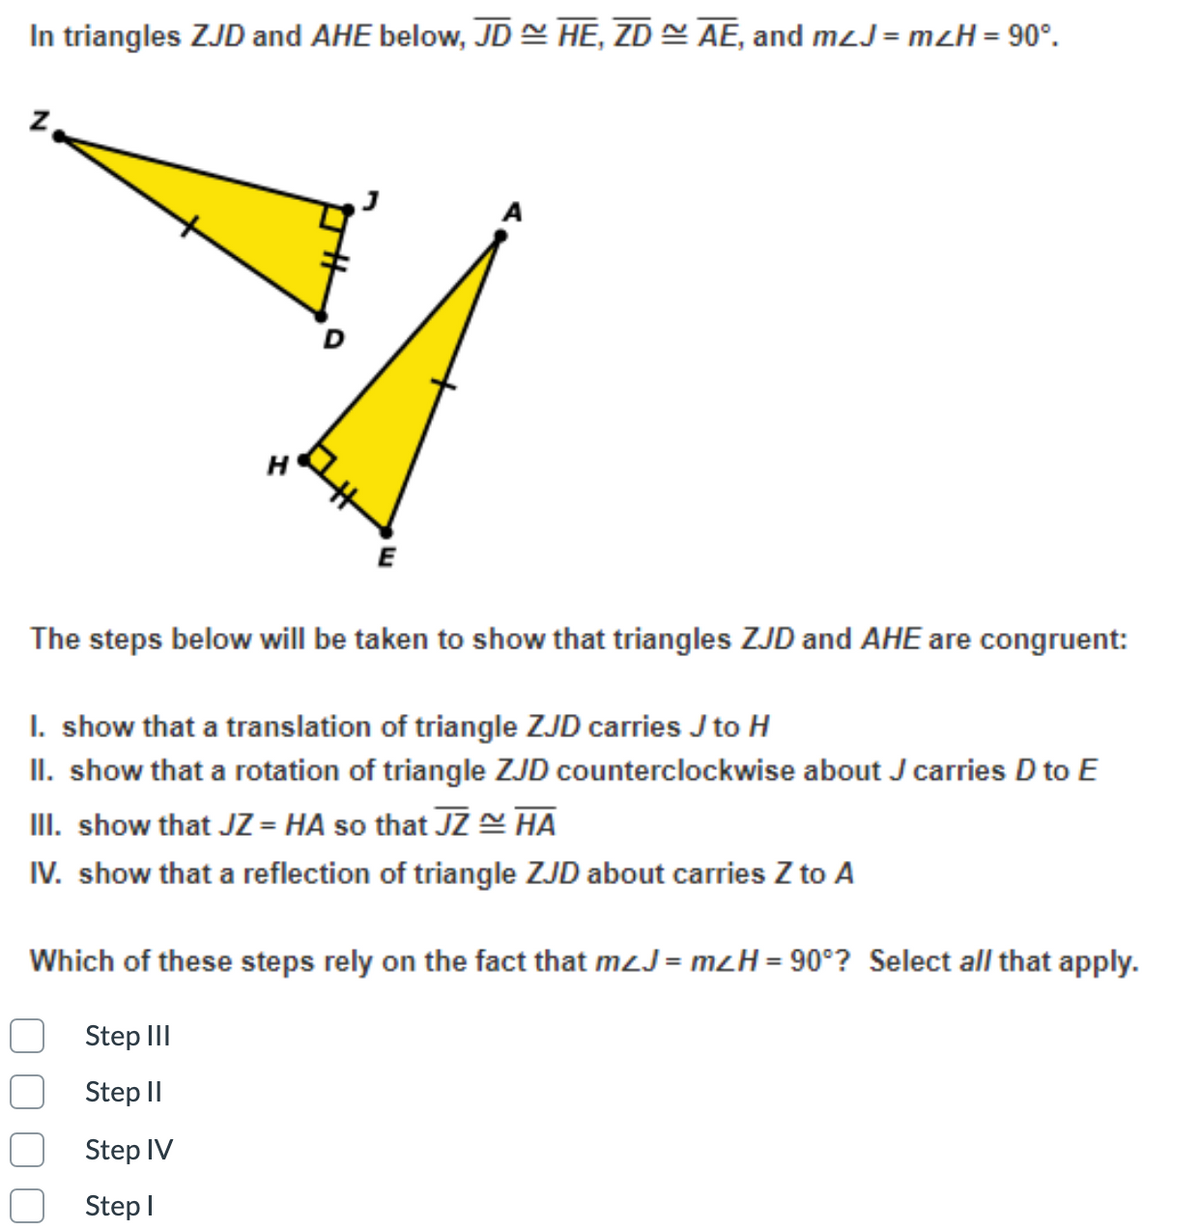 In triangles ZJD and AHE below, JD = HE, ZD AE, and mzJ = mzH = 90°.
H
E
The steps below will be taken to show that triangles ZJD and AHE are congruent:
I. show that a translation of triangle ZJD carries J to H
II. show that a rotation of triangle ZJD counterclockwise about J carries D to E
III. show that JZ = HA so that JZ HA
IV. show that a reflection of triangle ZJD about carries Z to A
Which of these steps rely on the fact that mzJ = mzH= 90°? Select all that apply.
Step III
Step II
Step IV
Step I
